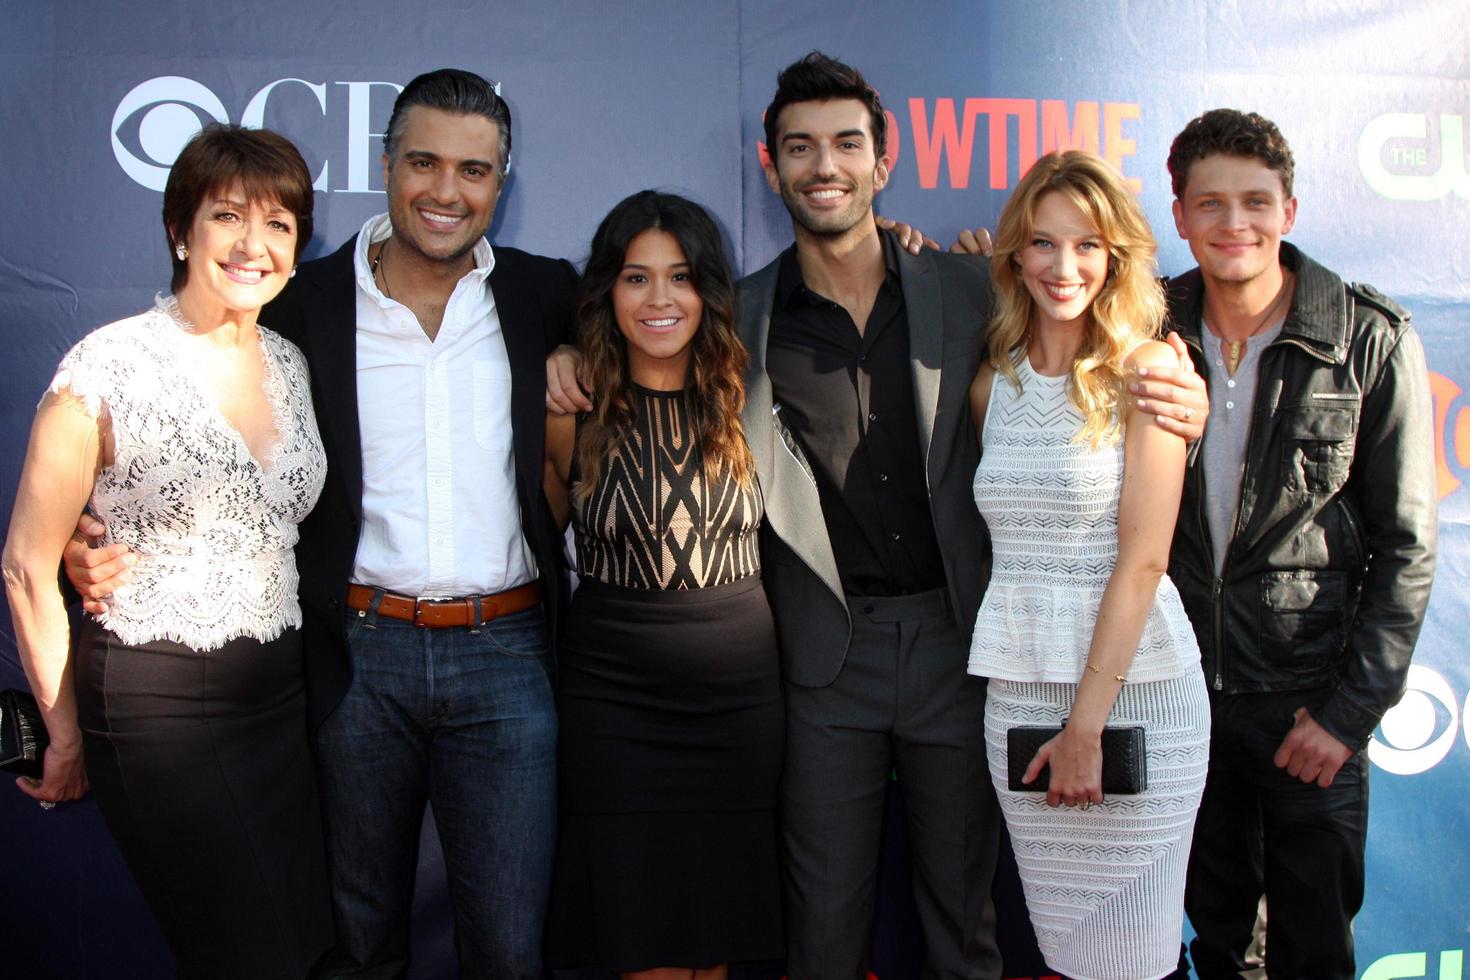 LOS ANGELES, JUL 17 -  Ivonne Coll, Jamie Camil, Gina Rodriguez, Justin Baldoni, Yael grobglas, Brett Dier at the CBS TCA July 2014 Party at the Pacific Design Center on July 17, 2014 in West Hollywood, CA photo